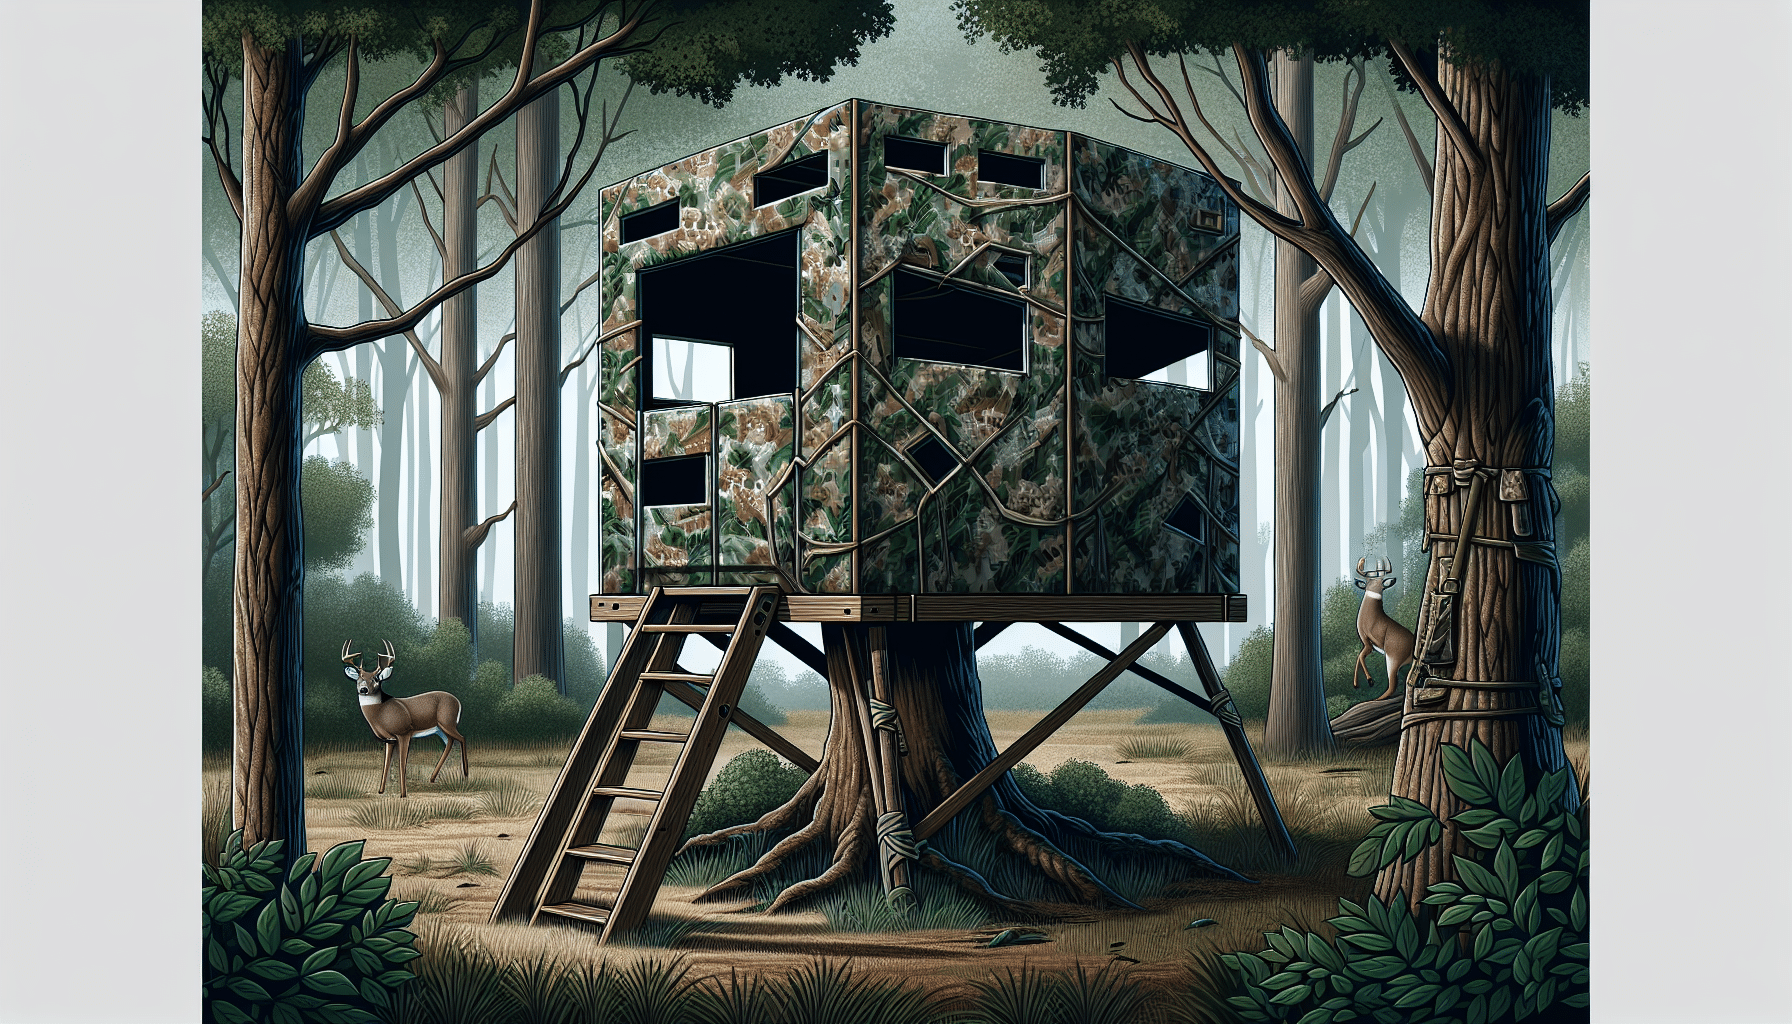 An illustration of a well-crafted deer hunting blind set in a dense forest. The blind is built on a sturdy tree, wrapped with natural-looking camouflage materials that blend within the surroundings. It features windows on all sides for visibility, and ladder steps for accessibility. Branches and leaves conceal the structure from view. The interior is spacious, indicating room for movement and storage. There are no brand logos, text, or humans present. The serene forest backdrop includes various wildlife, minus deer, to maintain the hunt's element of surprise.